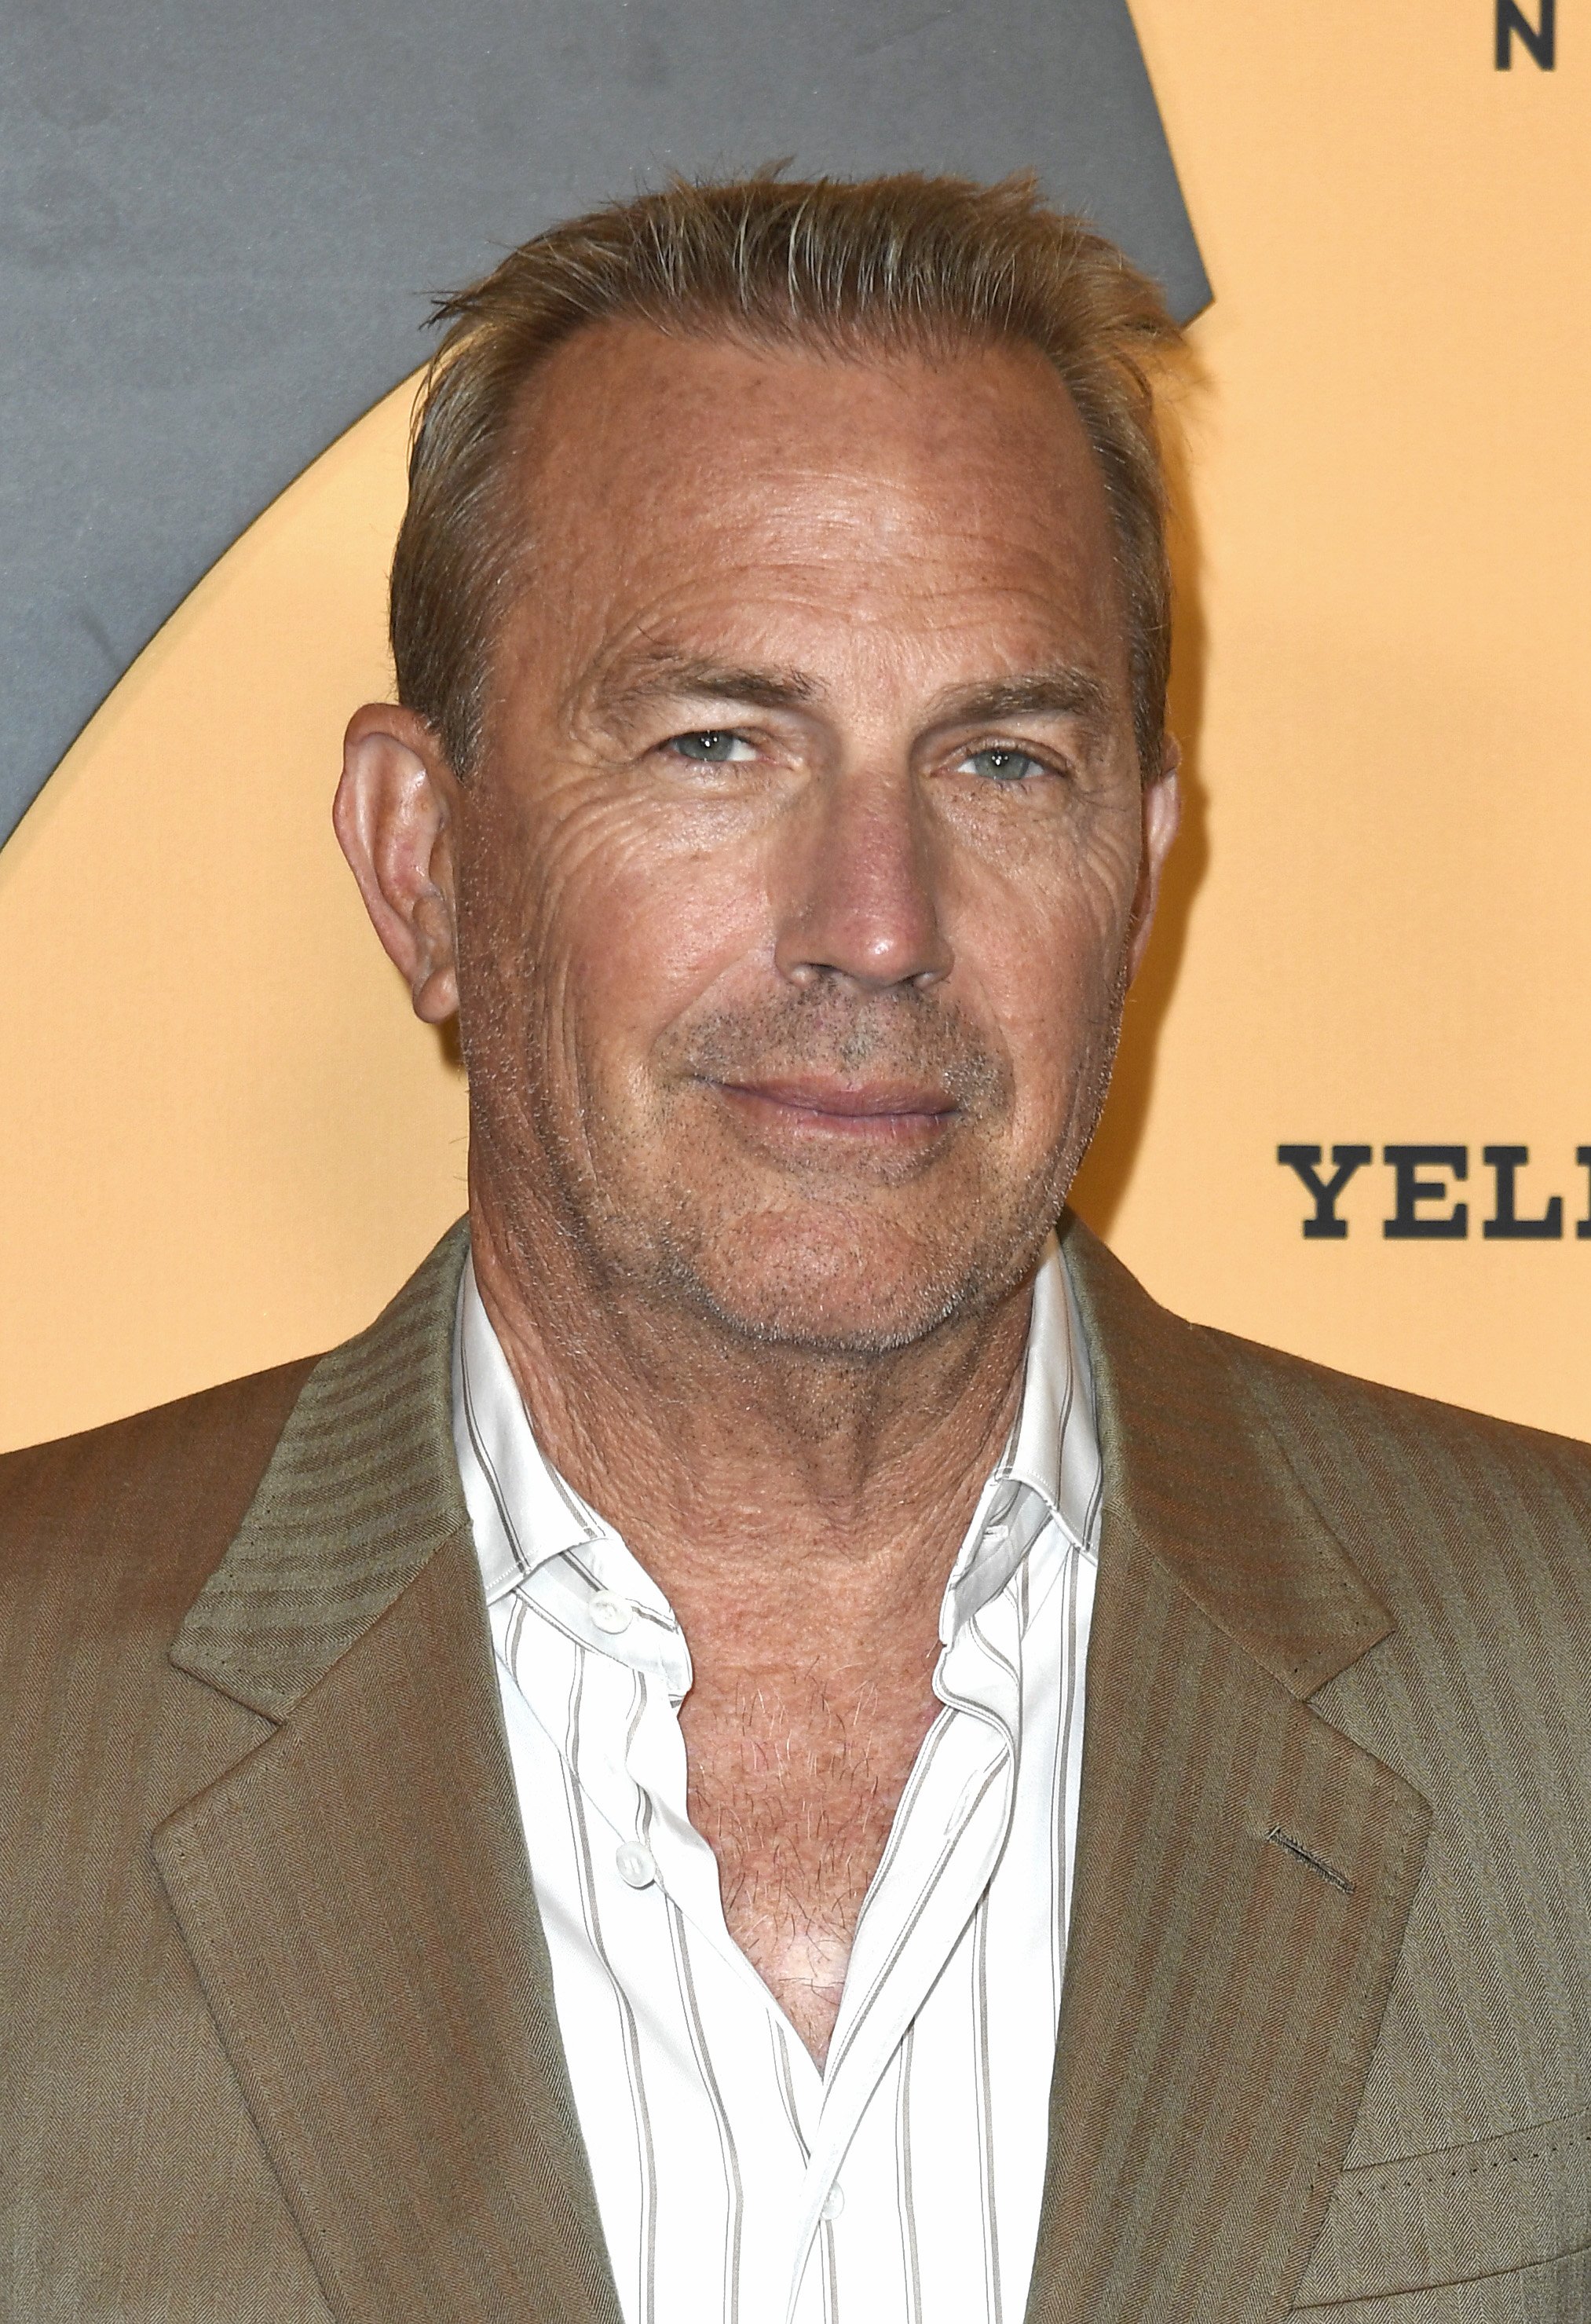 Kevin Costner attends Paramount Network's "Yellowstone" Season 2 Premiere Party at Lombardi House on May 30, 2019 in Los Angeles, California| Photo: Getty Images